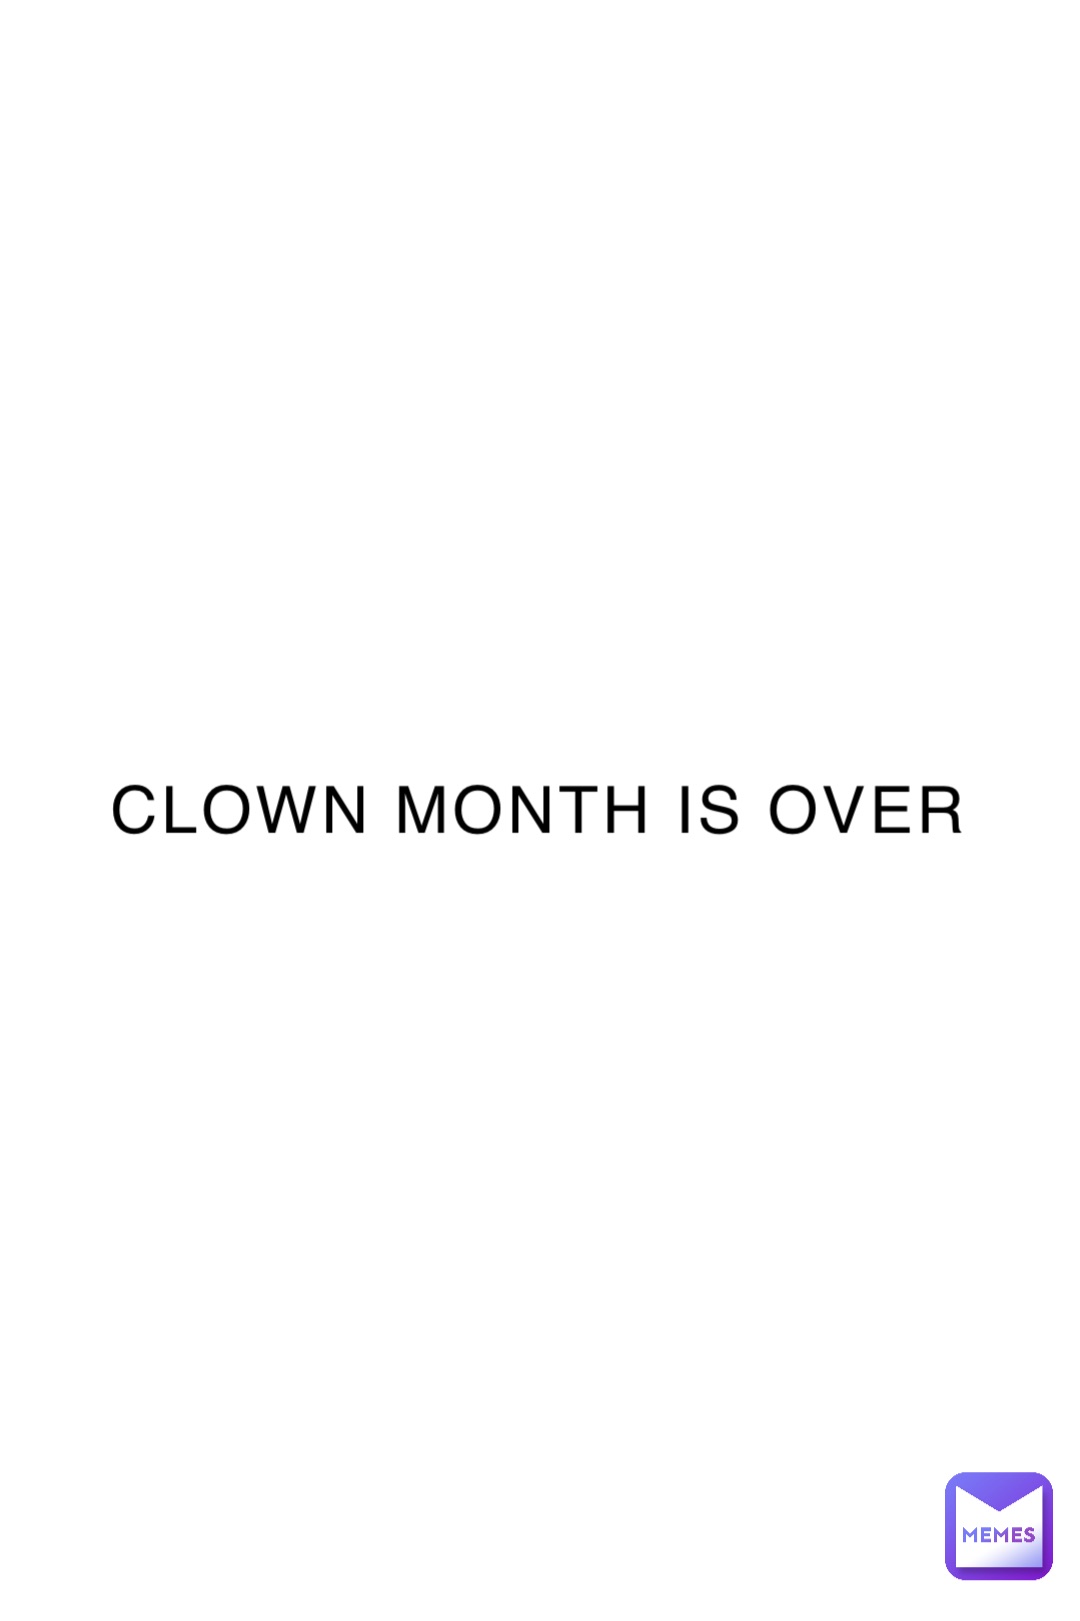 CLOWN MONTH IS OVER